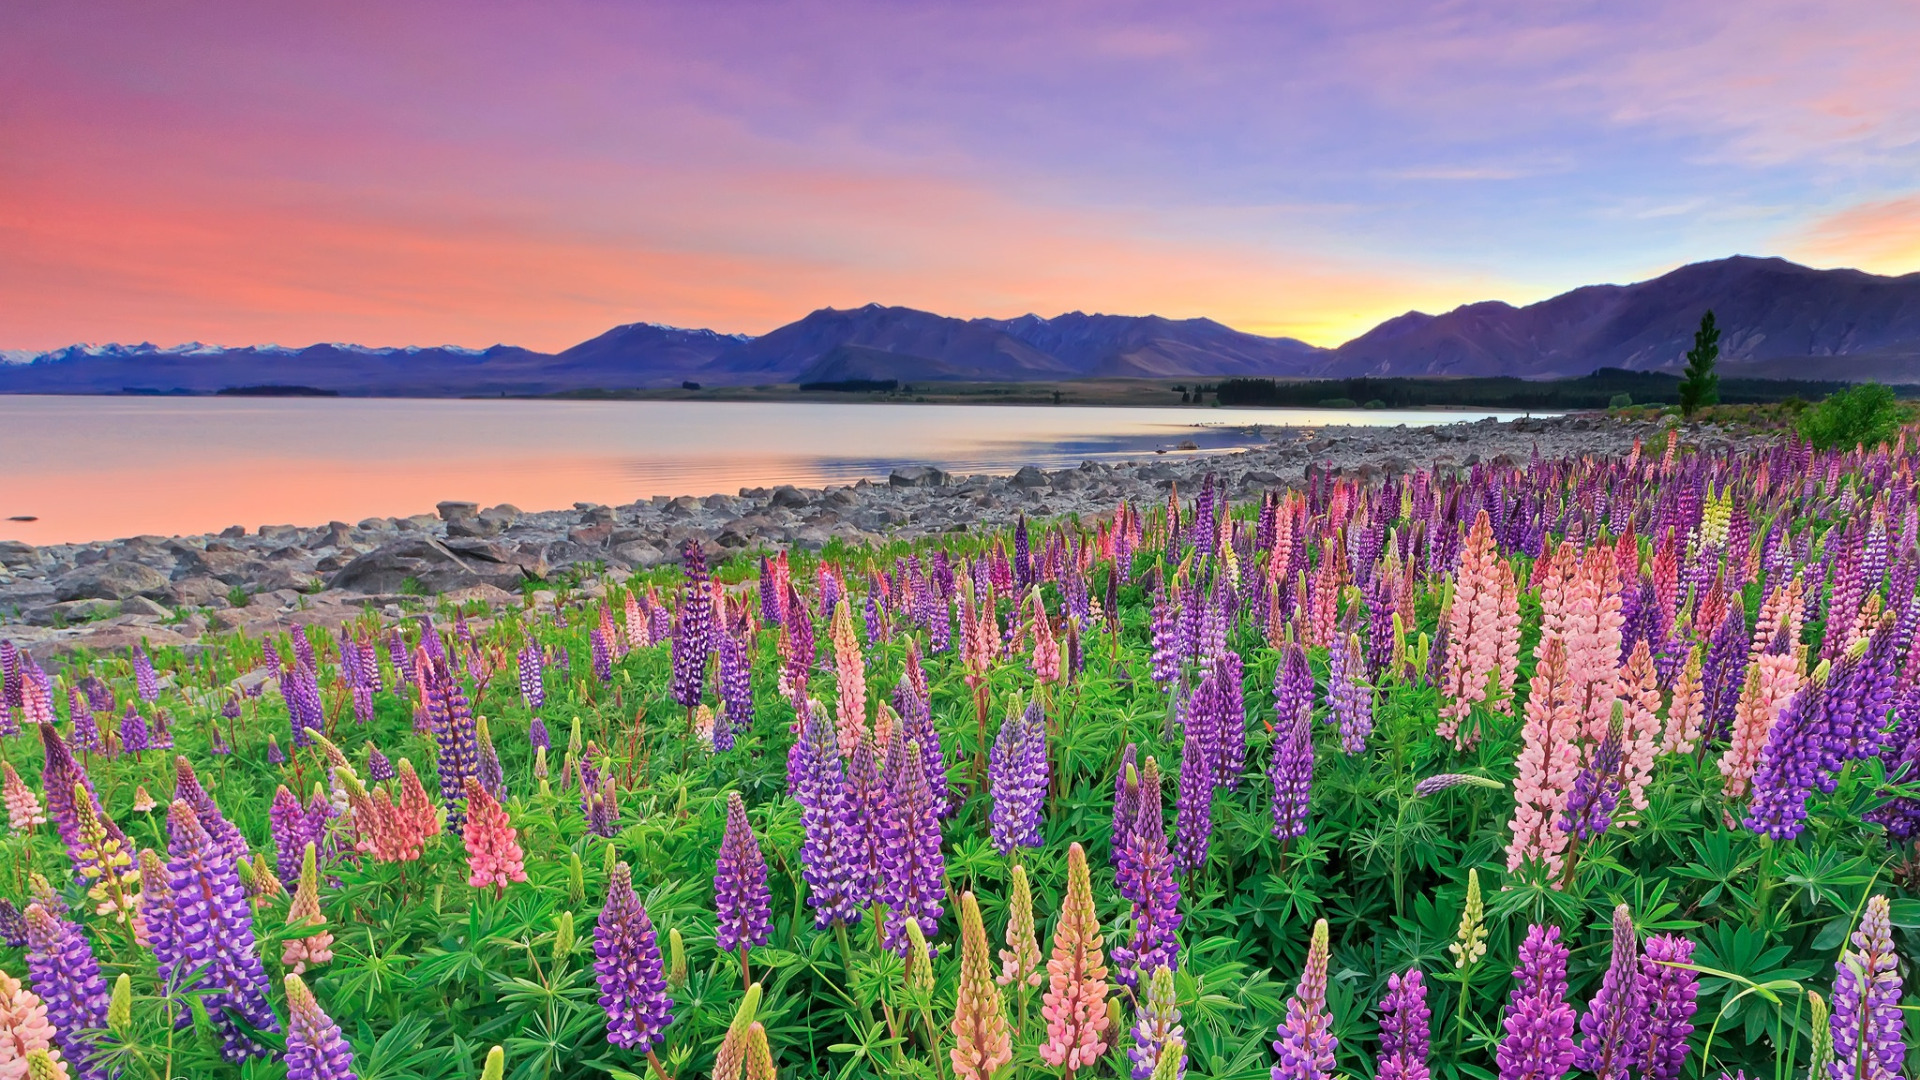 Download wallpaper flowers, mountains, lake, New Zealand, New 